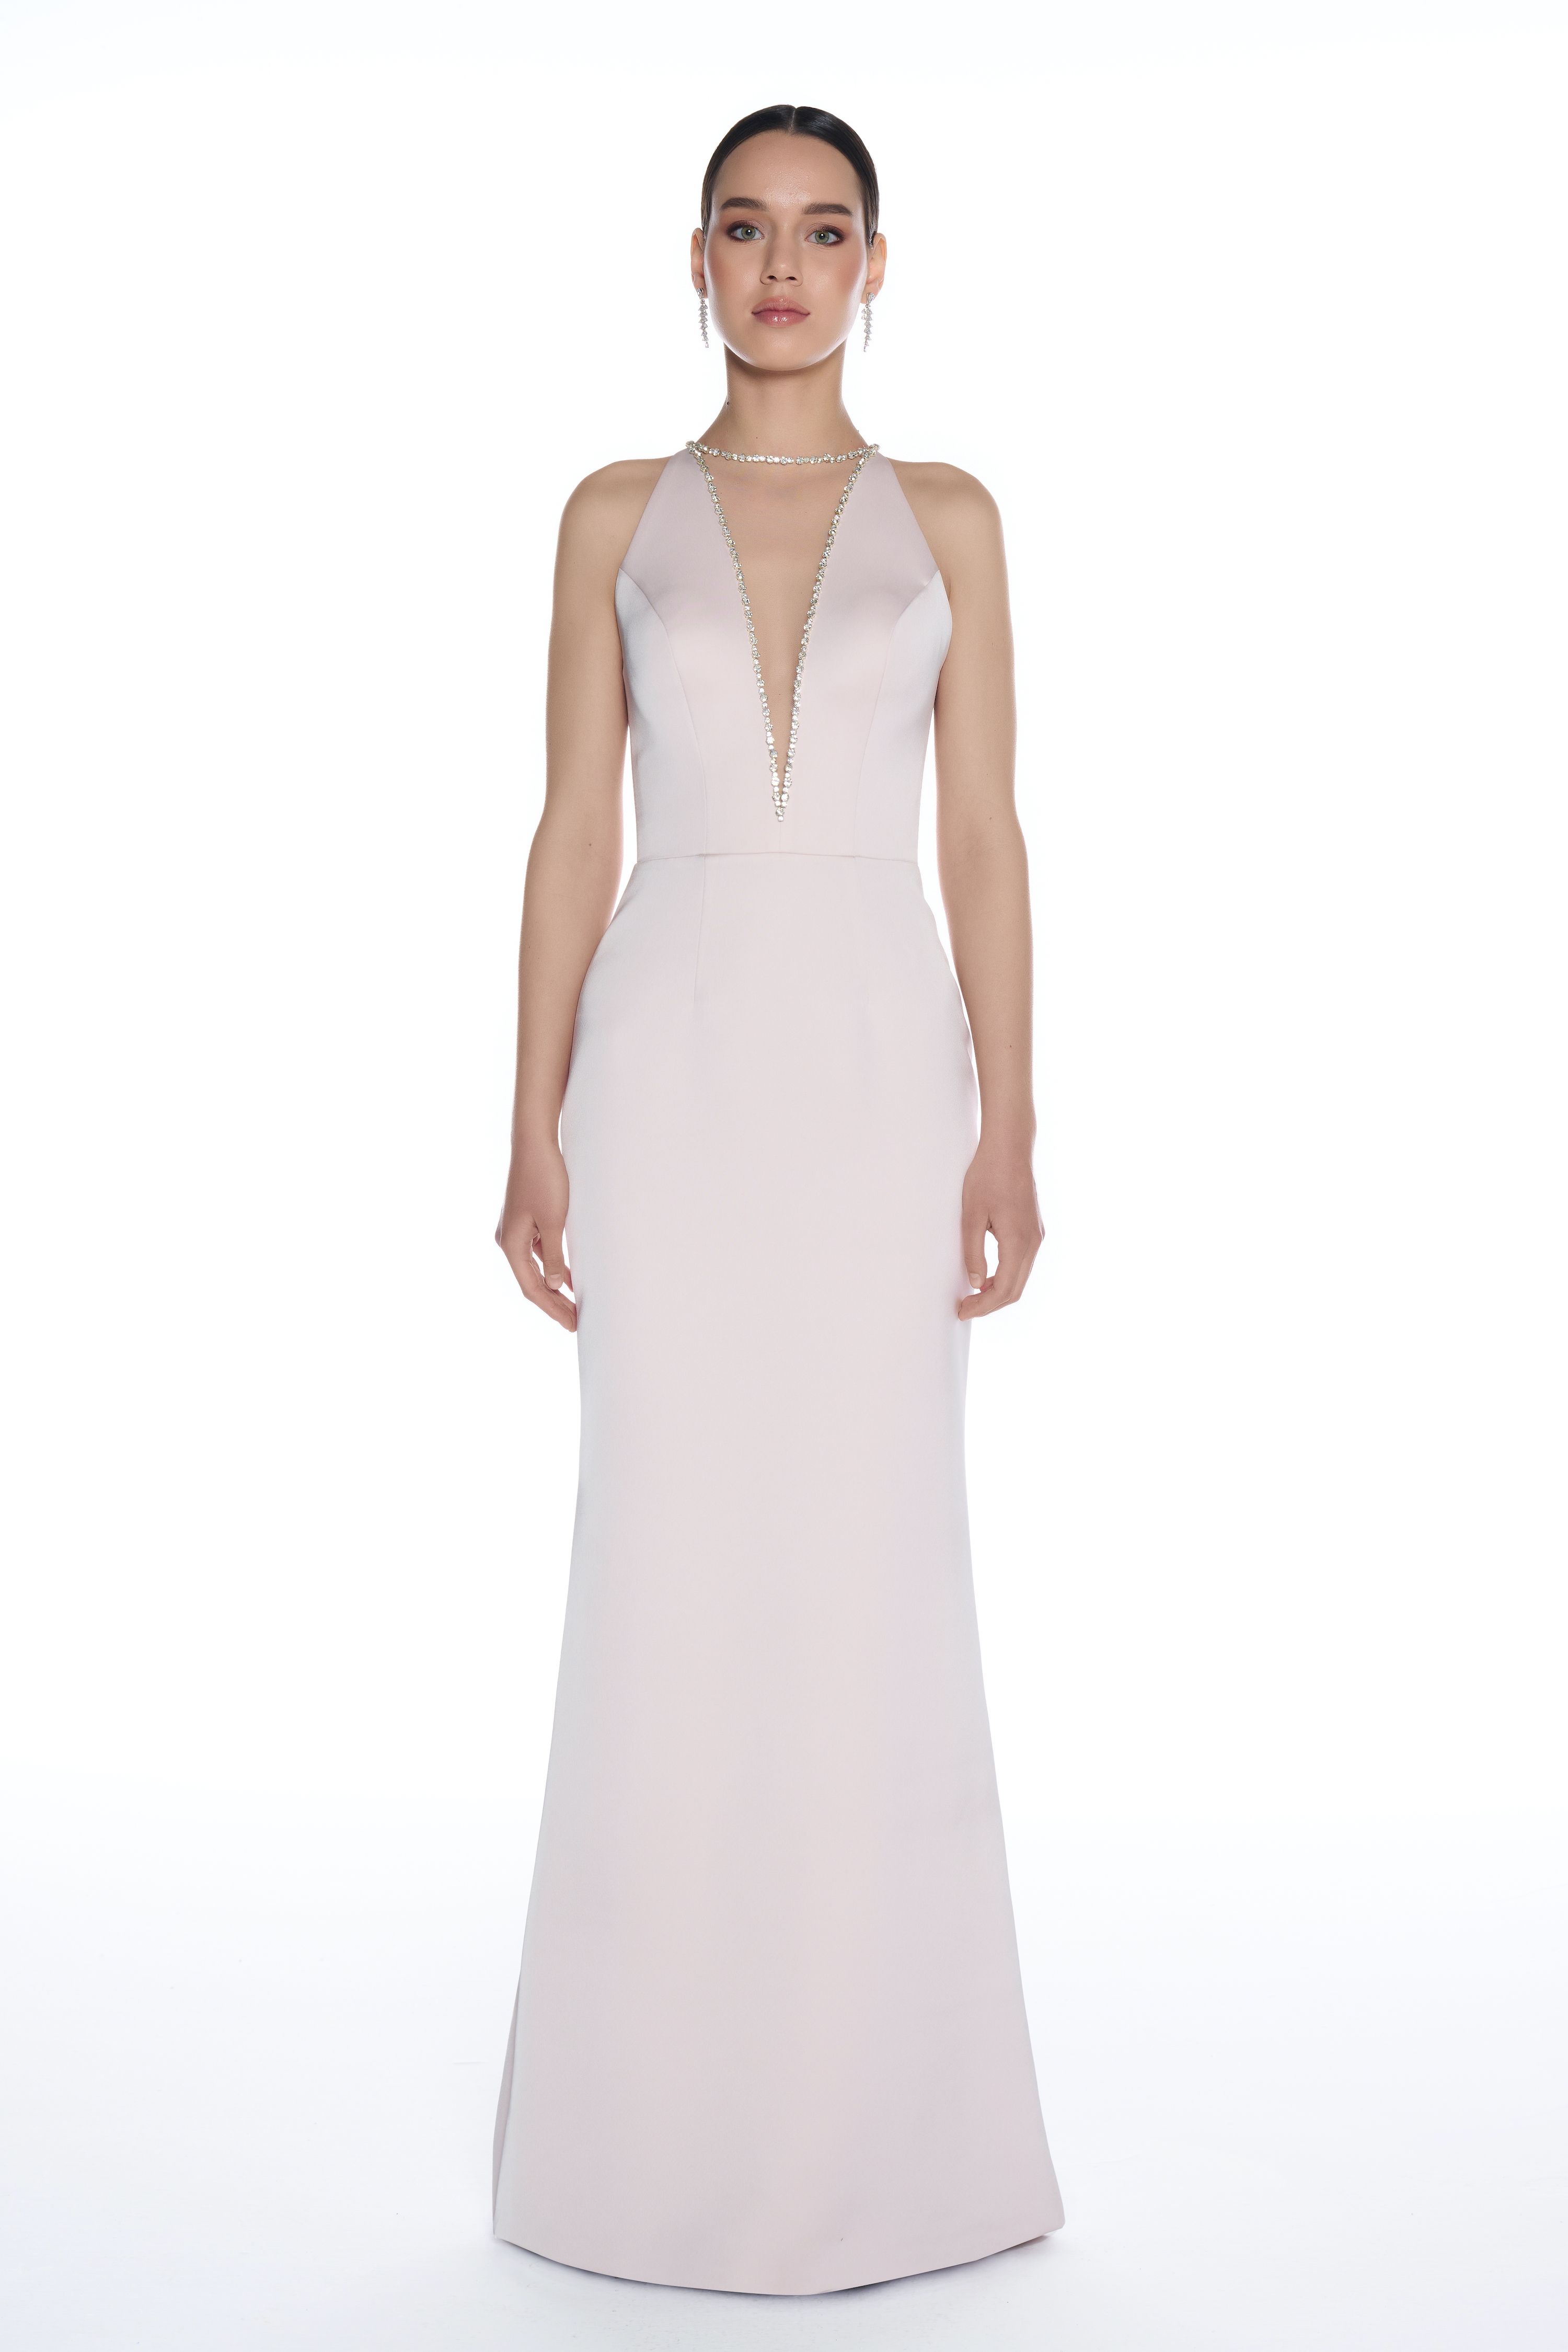 R41 - Deep V-Neck, Stone Hand Embroidery Detailing on the Collar, Long Dress